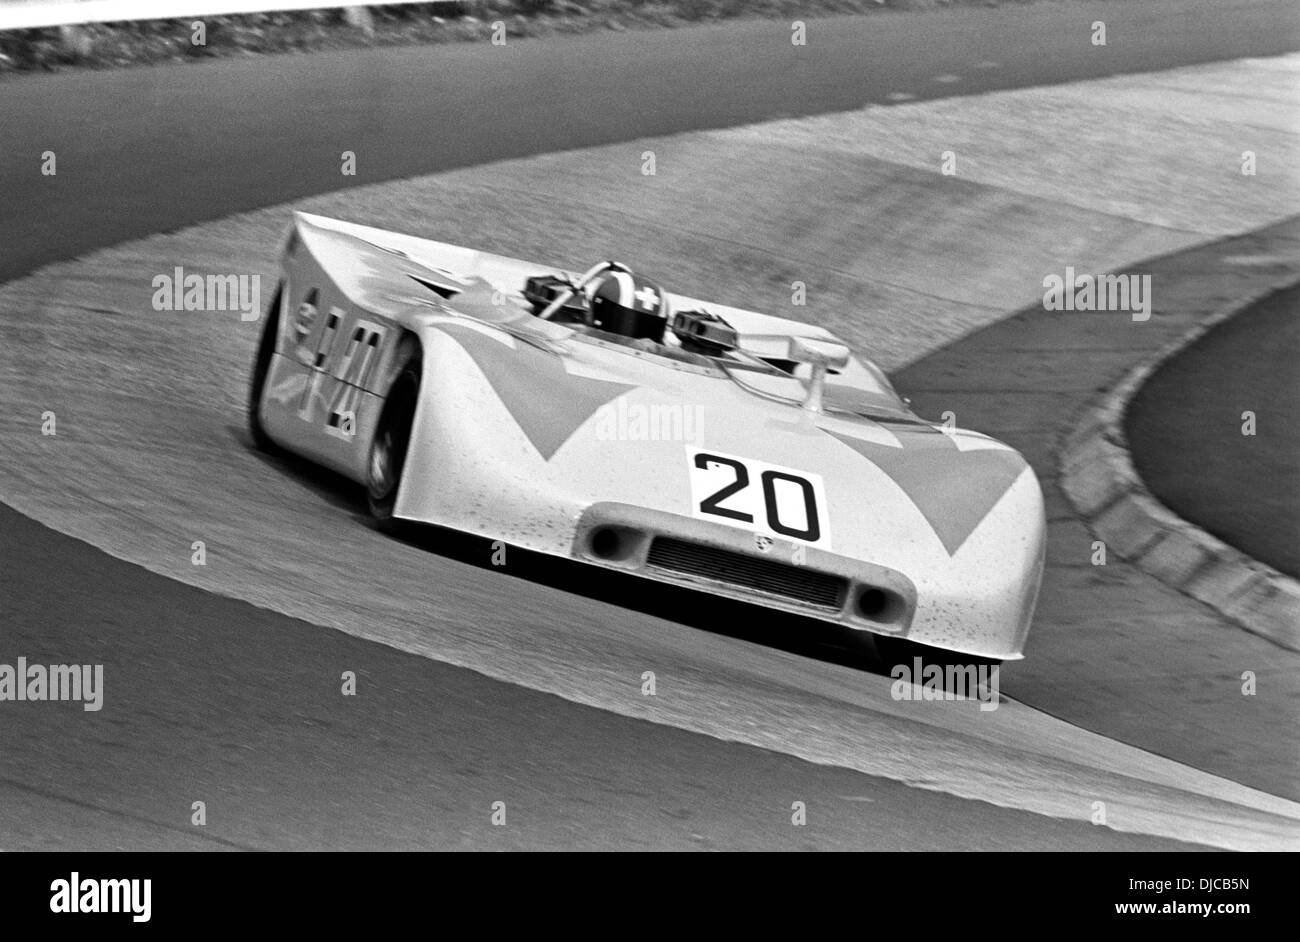 Jo Siffert-Brian Redman's Porsche 908 in the Karussel, Nurburgring 1000Kms, Germany 31 May 1970. Stock Photo